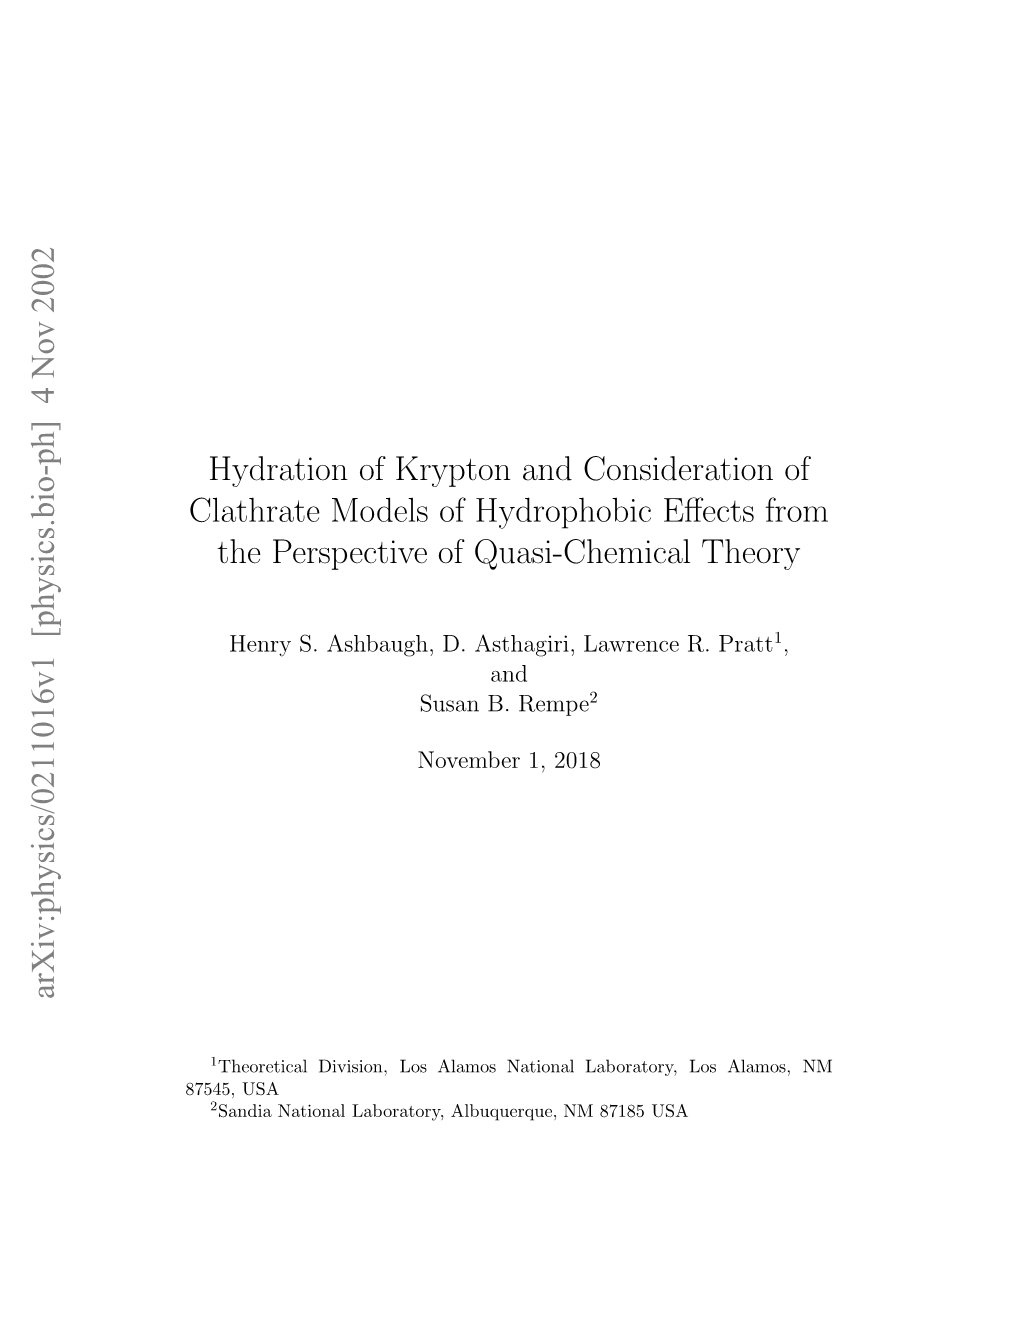 Hydration of Krypton and Consideration of Clathrate Models